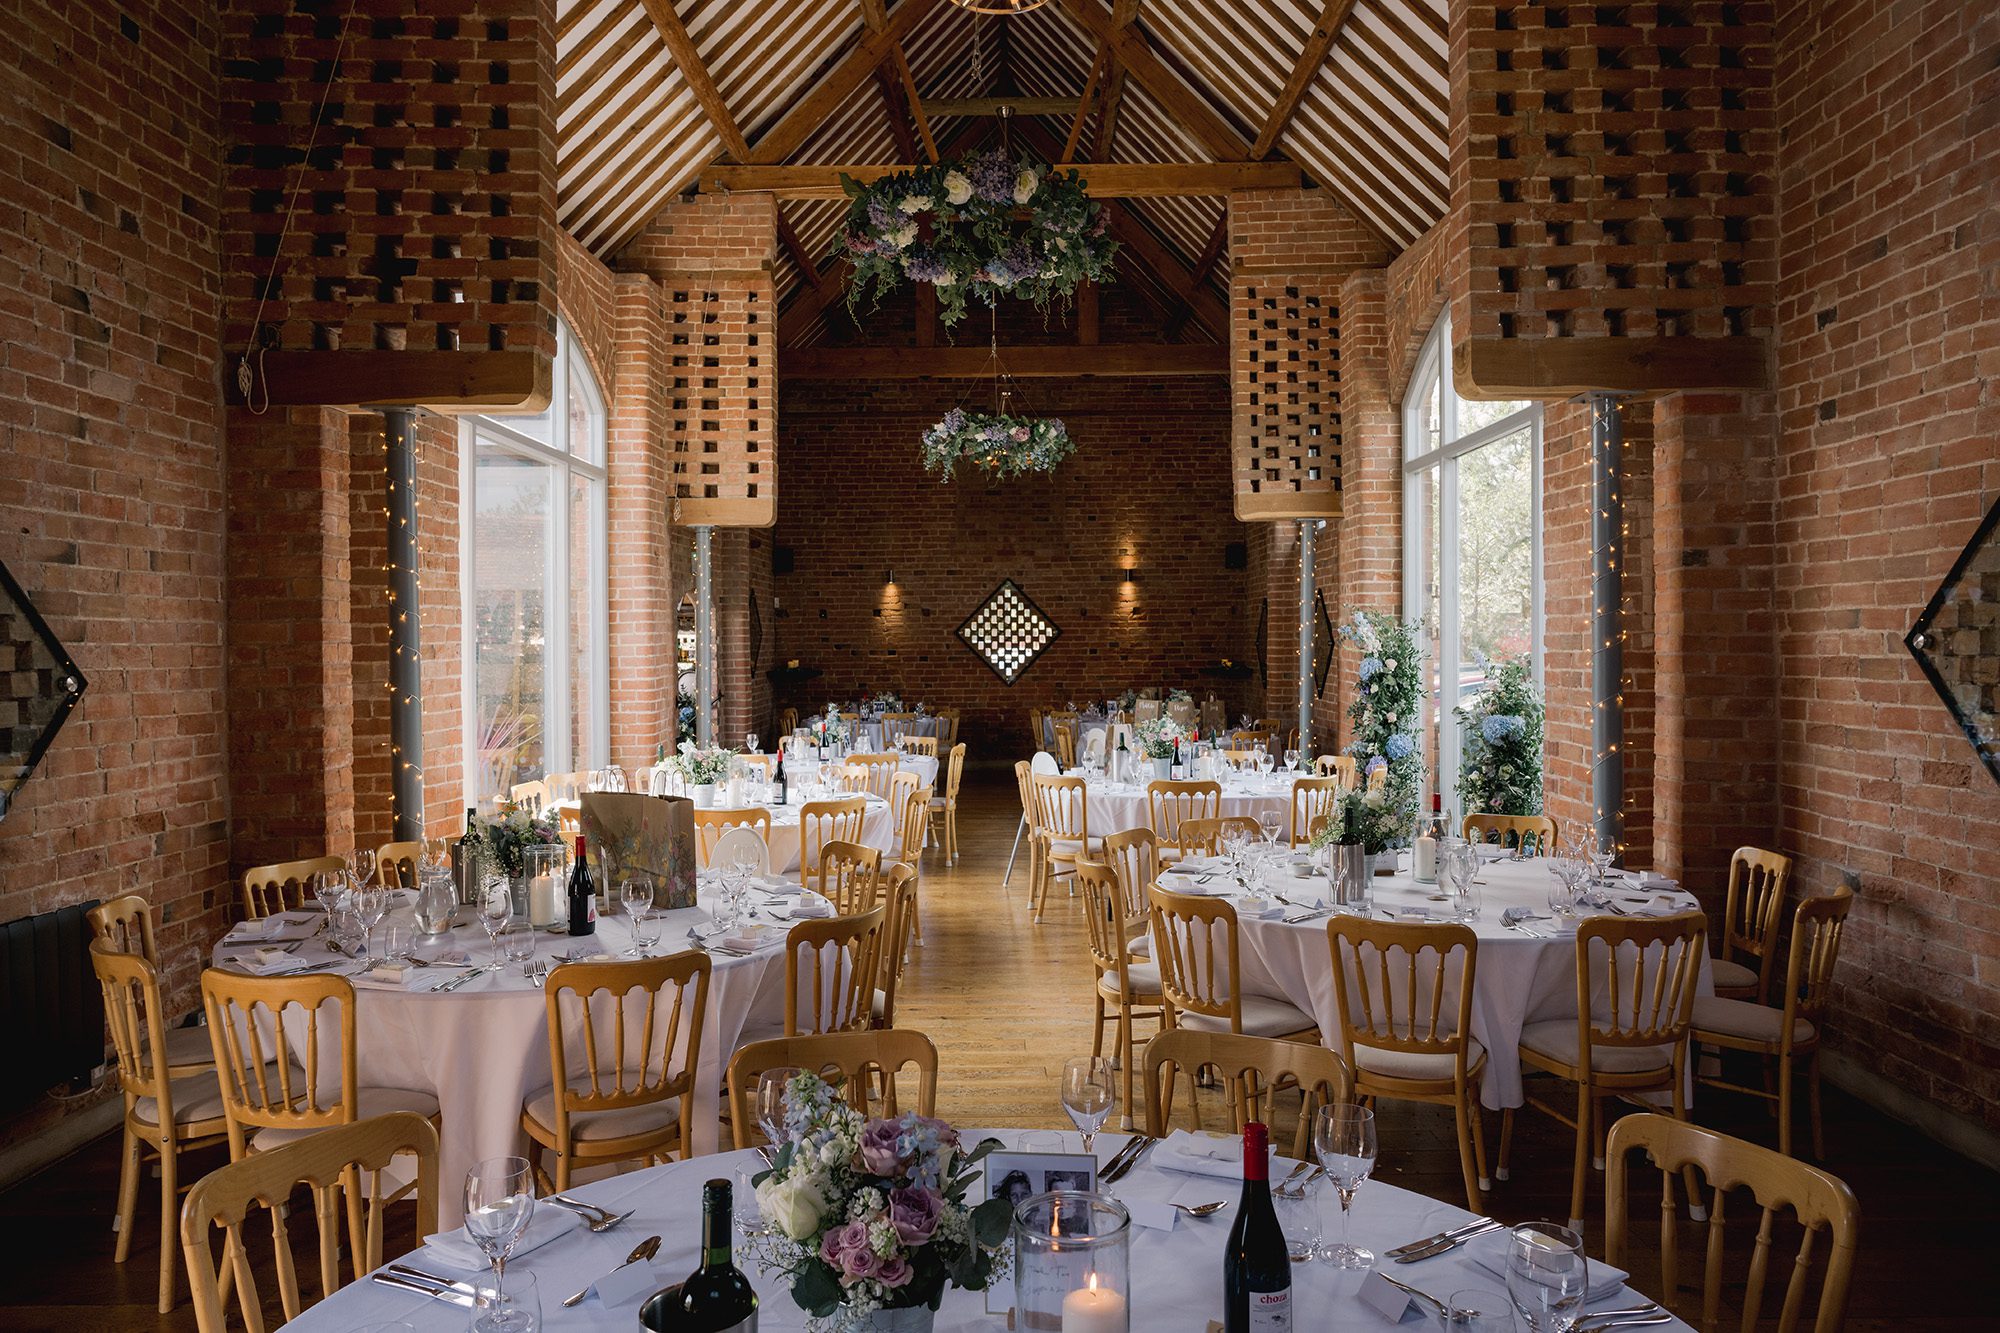 Reception tables all ready for a wedding at Swallows Nest Barn in Warwickshire.